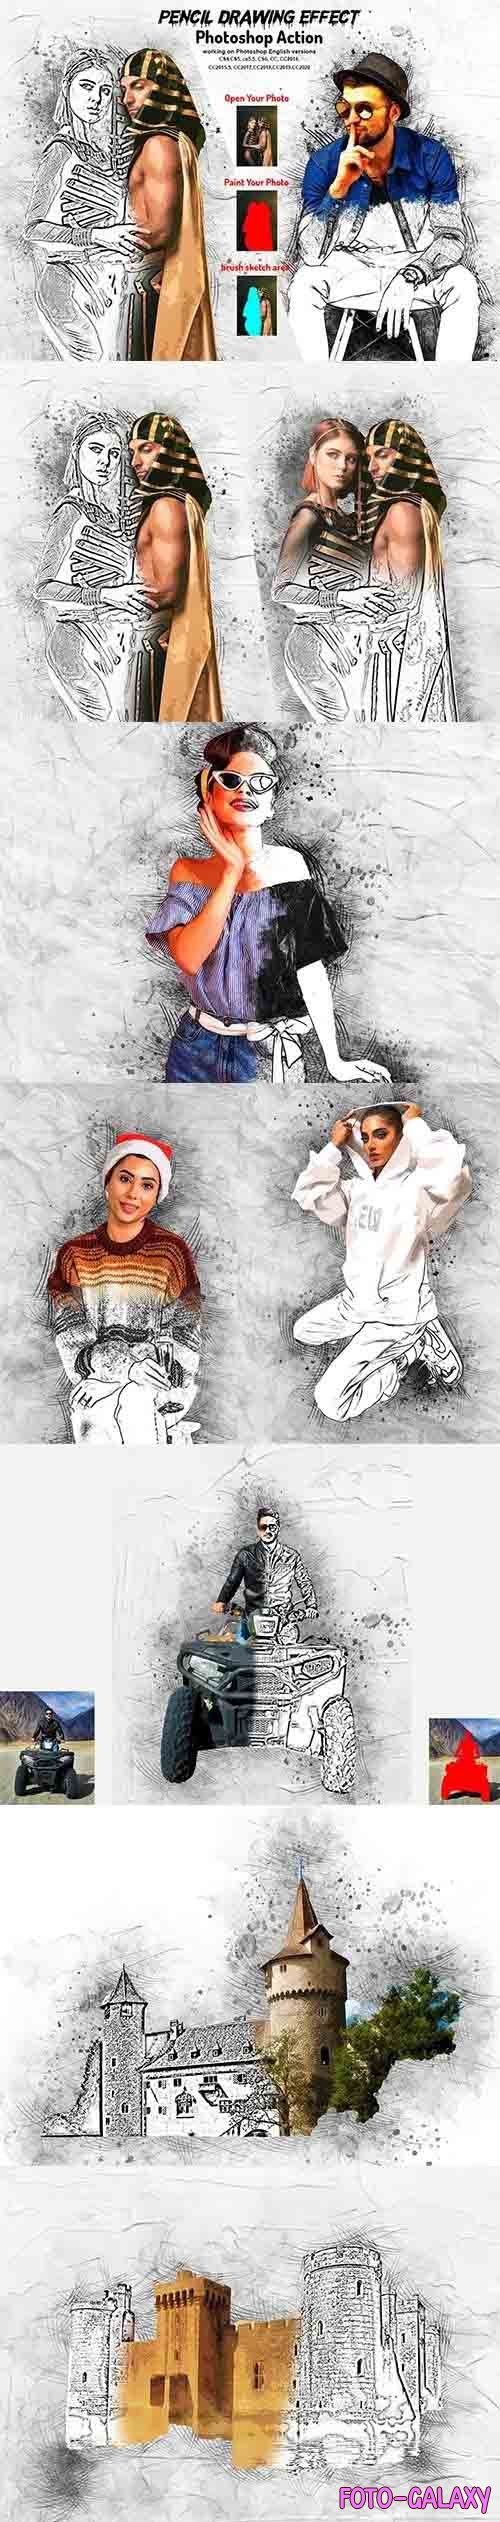 CreativeMarket - Pencil Drawing Effect PS Action 5891890